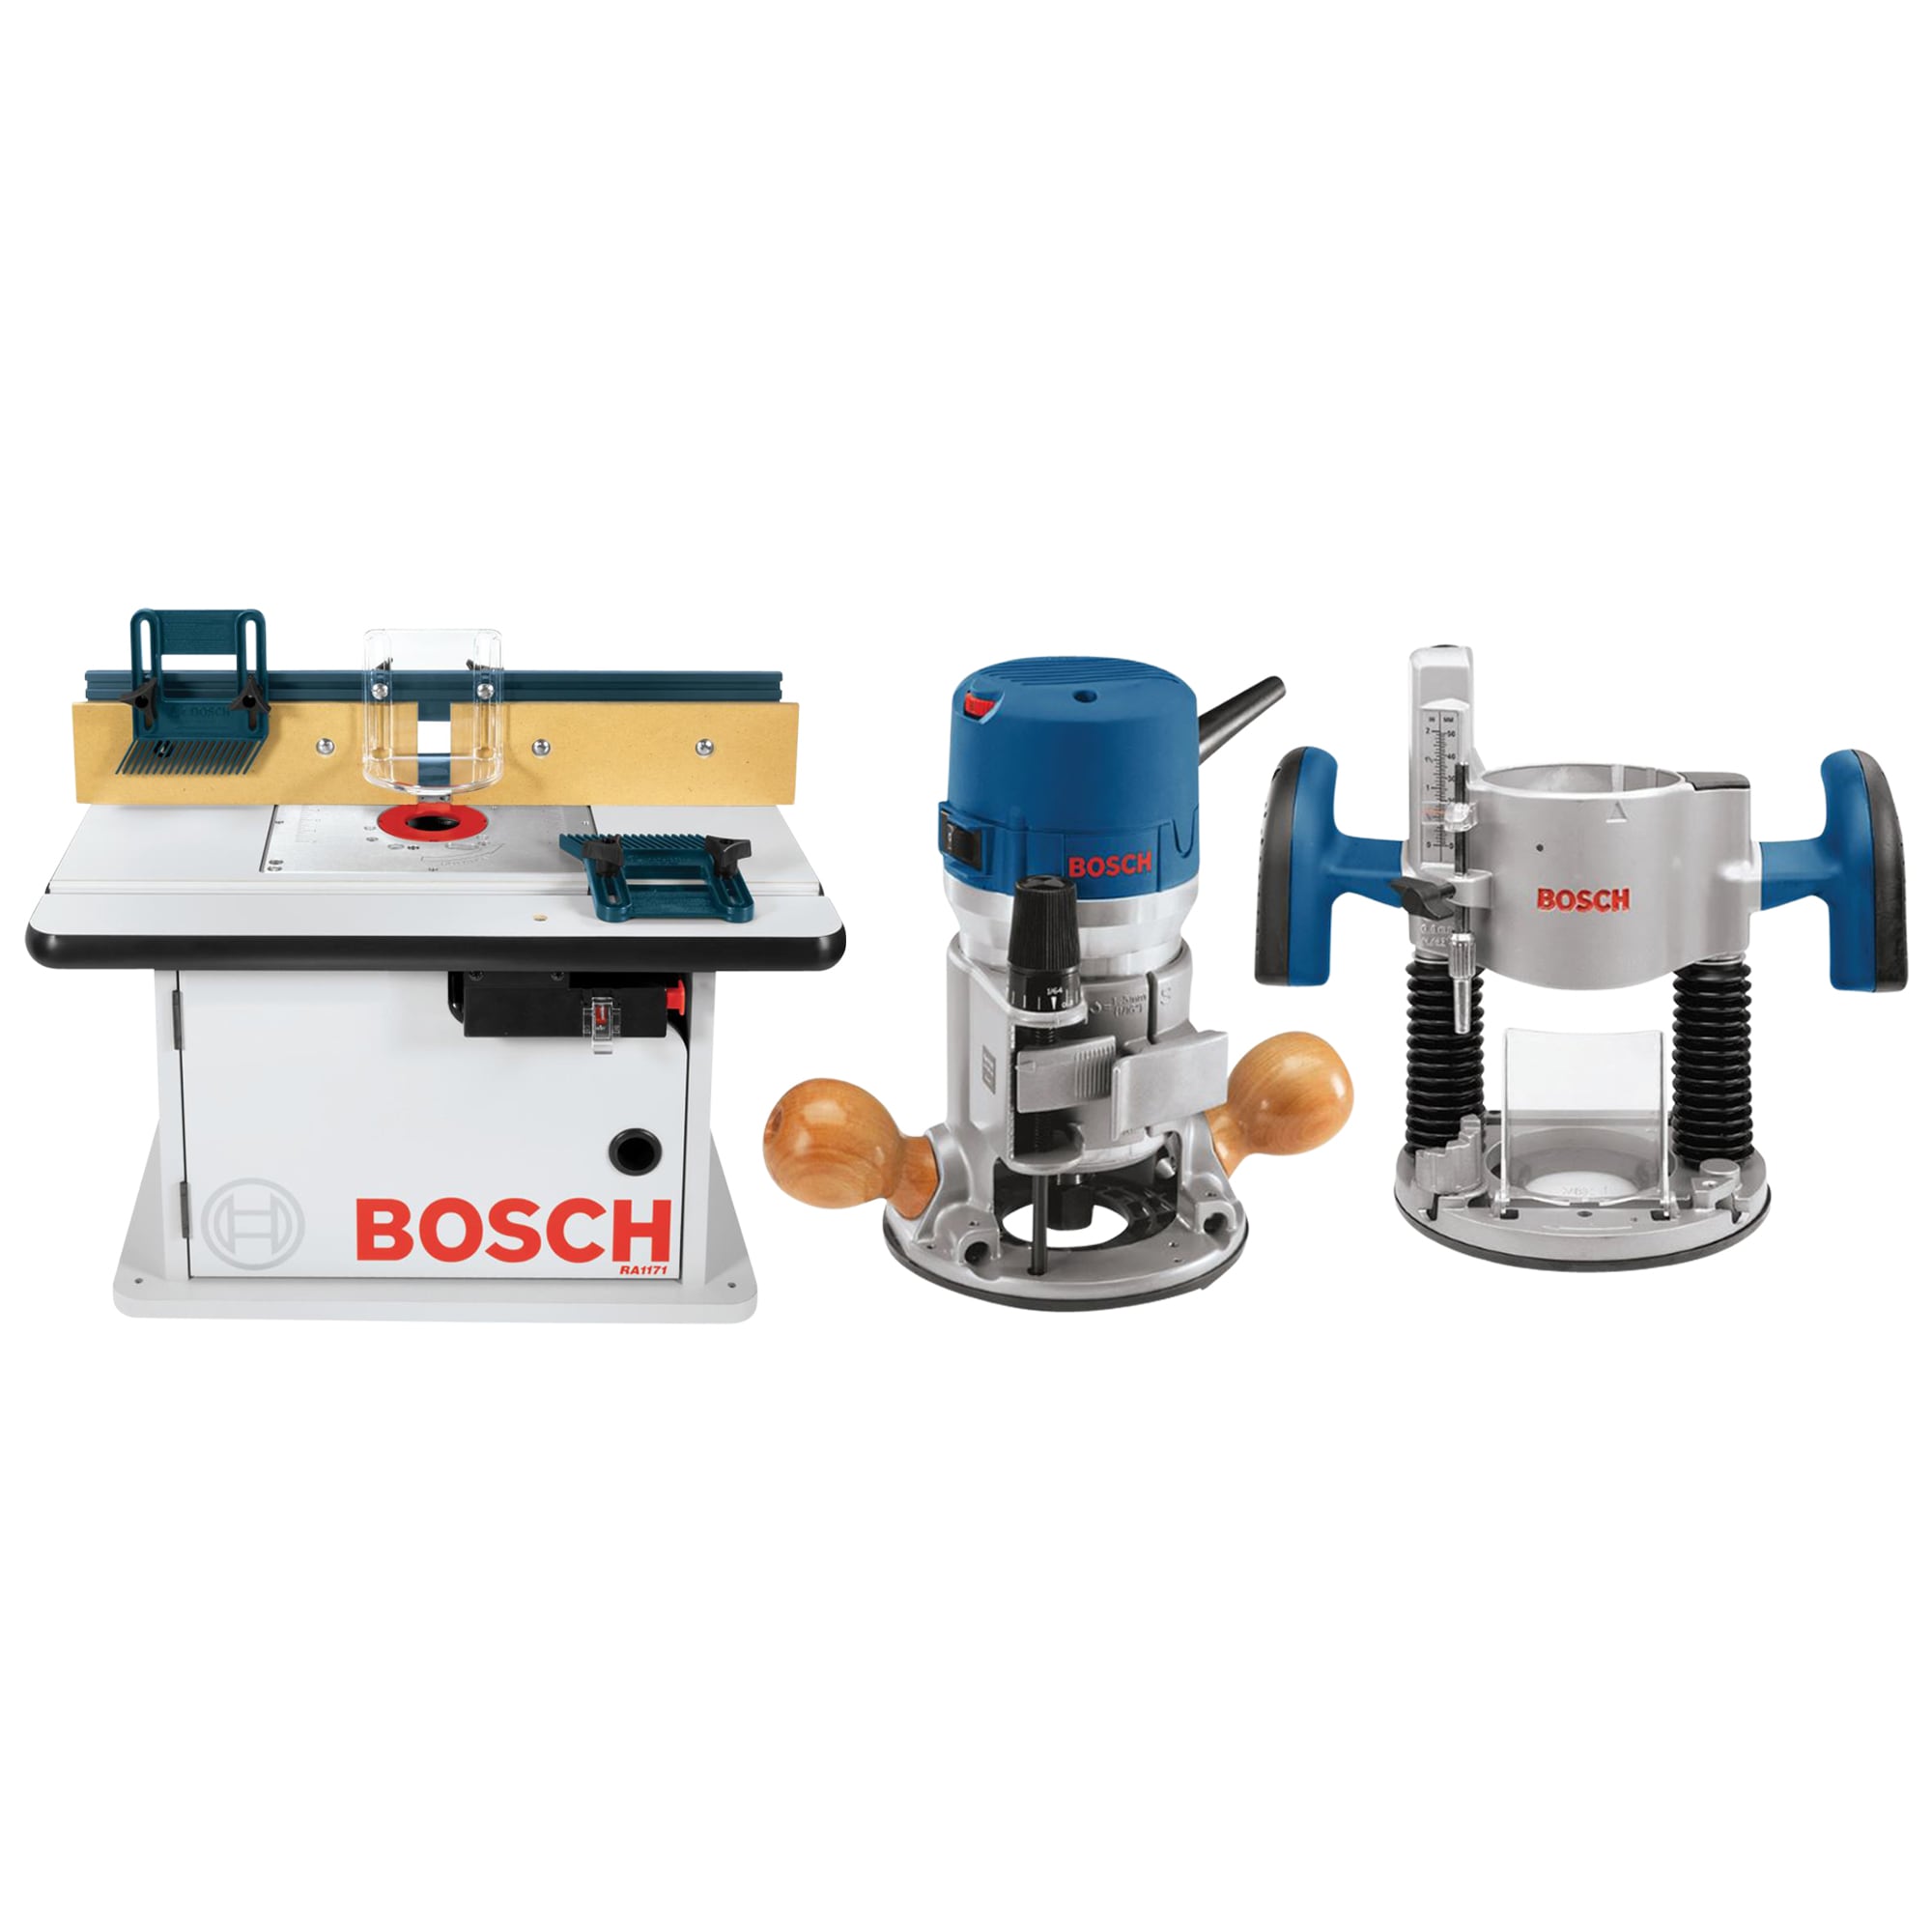 Bosch Bosch Plunge & Fixed-Base Router Combo Kit w/ Cabinet Style Router Table